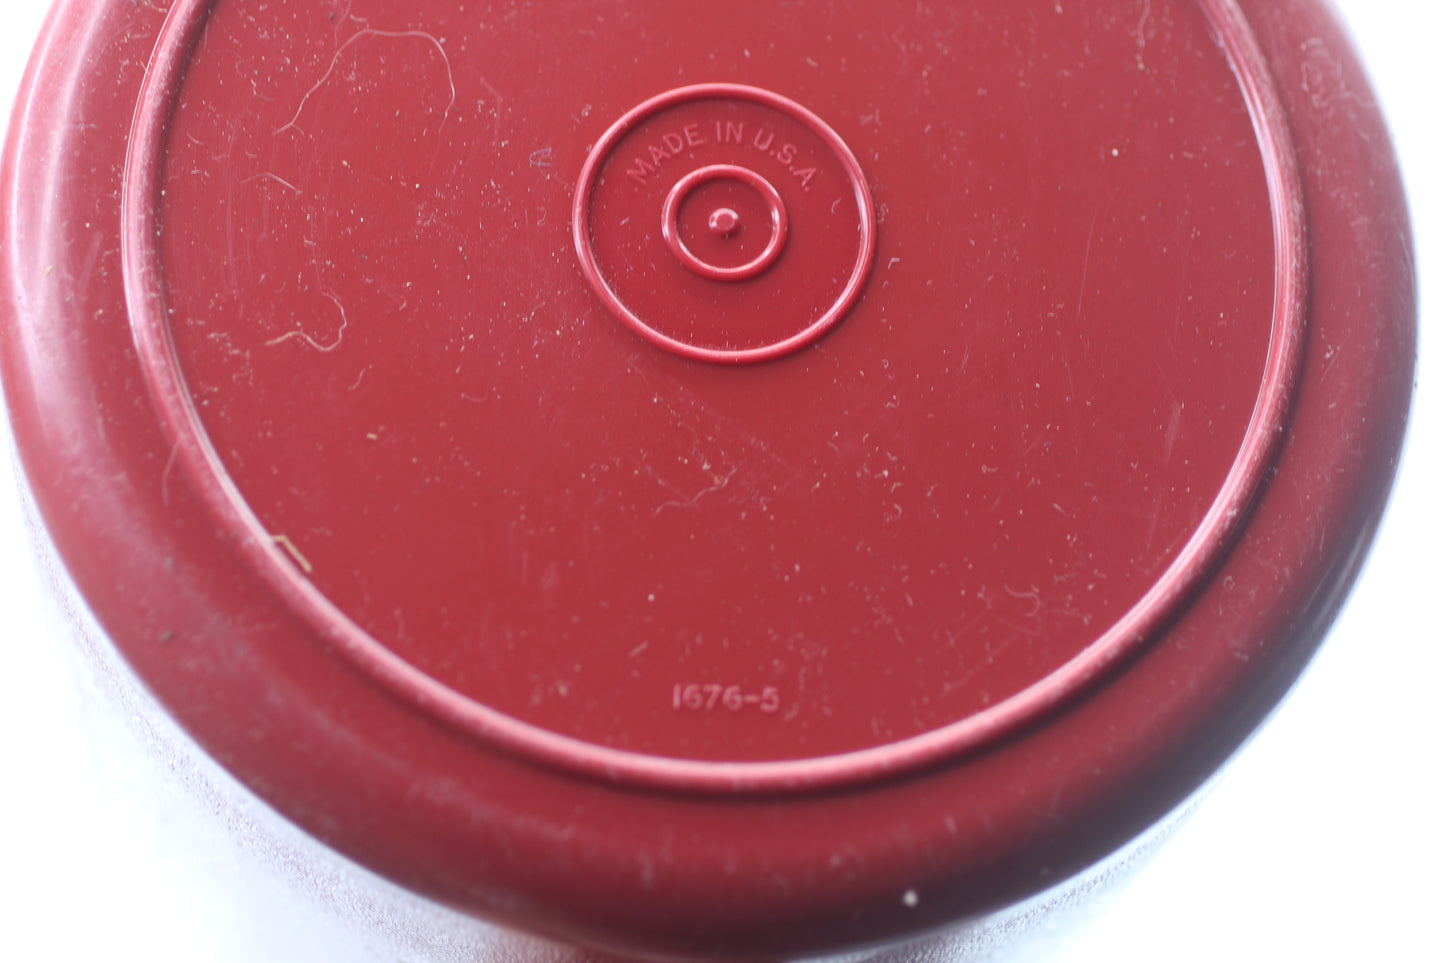 Tupperware Dark Red 2 Qt Pitcher with Push Button Sealing Lid 1676-5